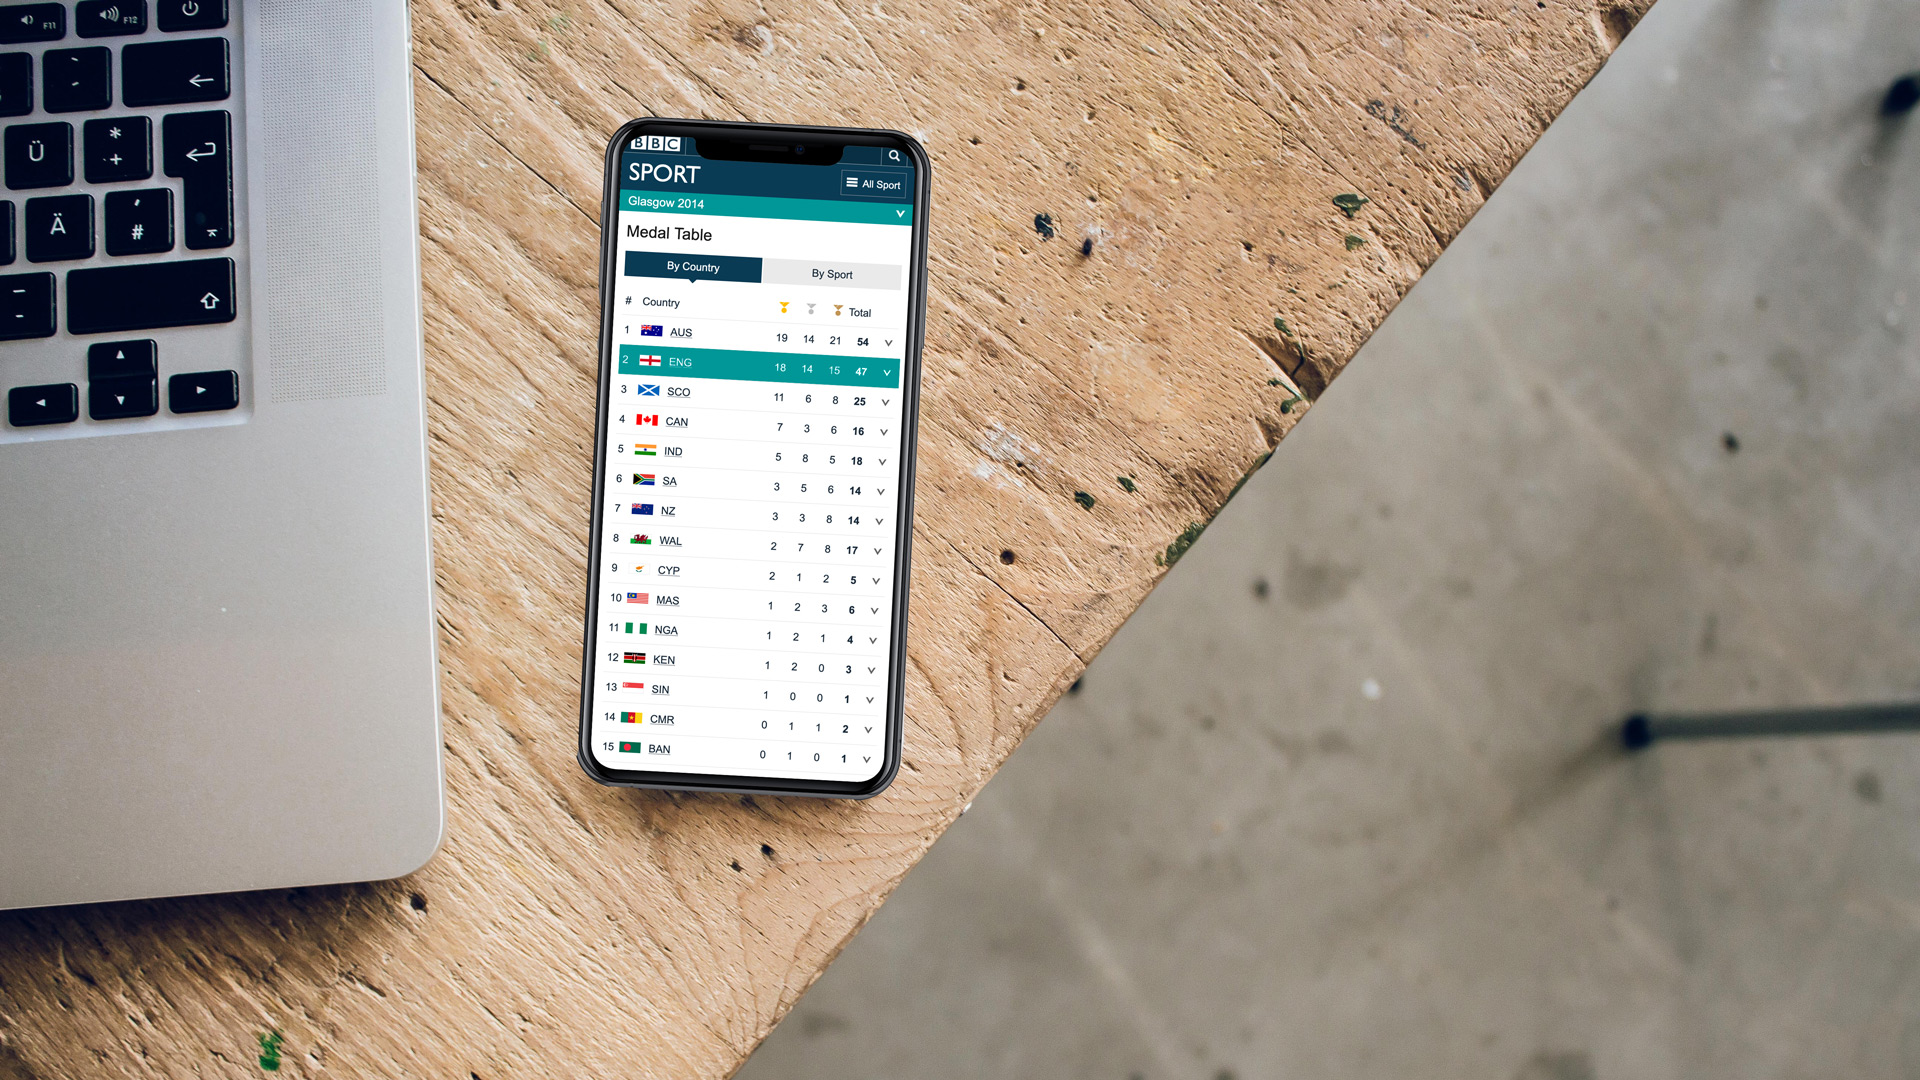 A zoomed-in photograph shows a mobile phone and a corner of a laptop resting on a wooden table. The mobile screen has the Commonwealth Games medal table open on it. The row that shows England is highlighted in a teal colour, depicting the user's home country. 